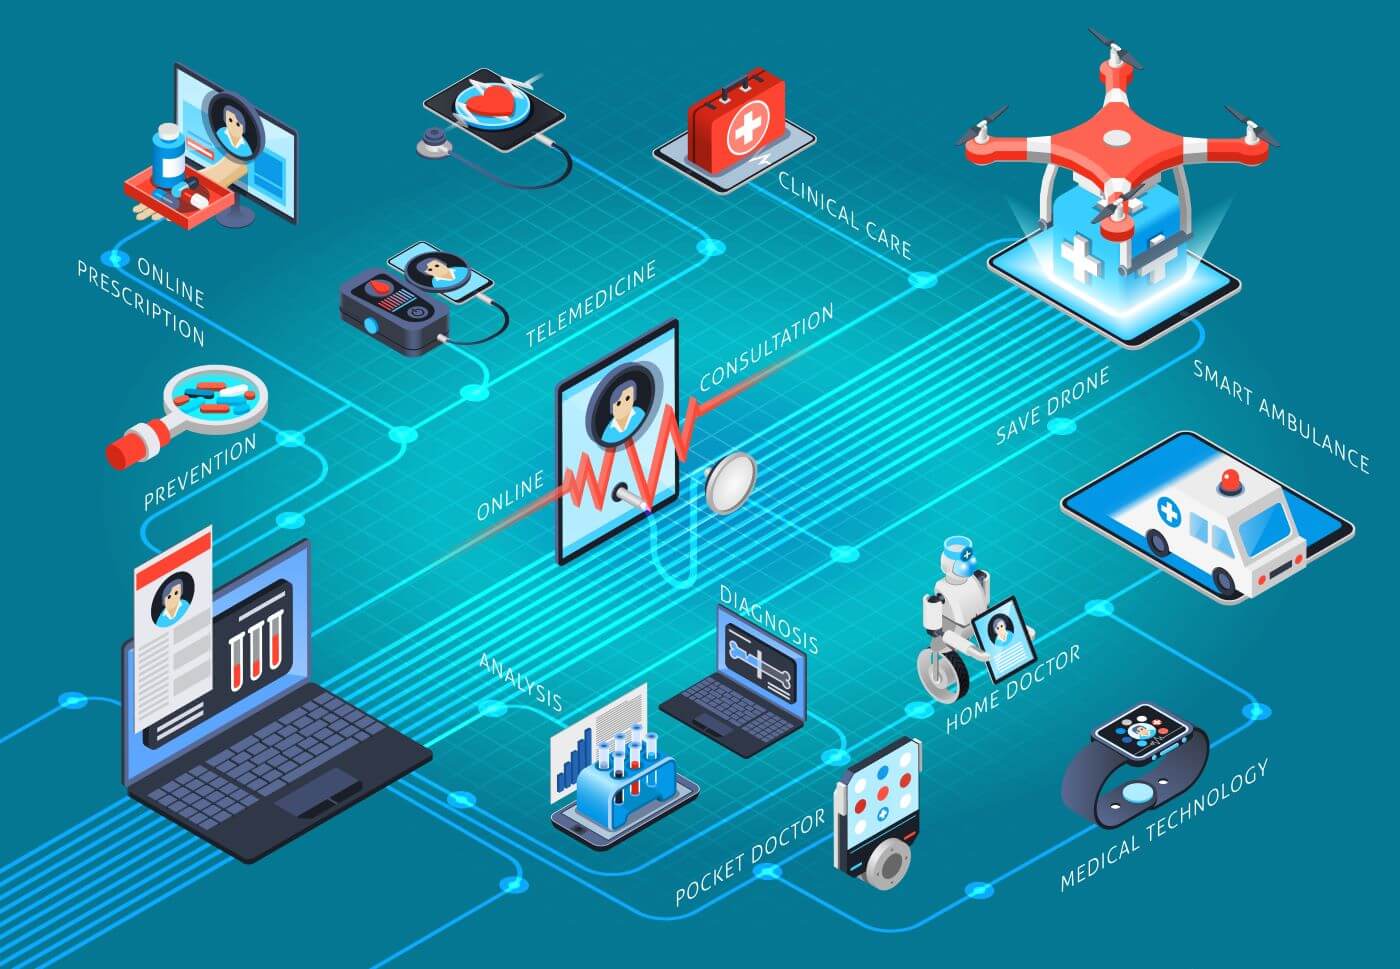 Visual representation of connected devices in healthcare